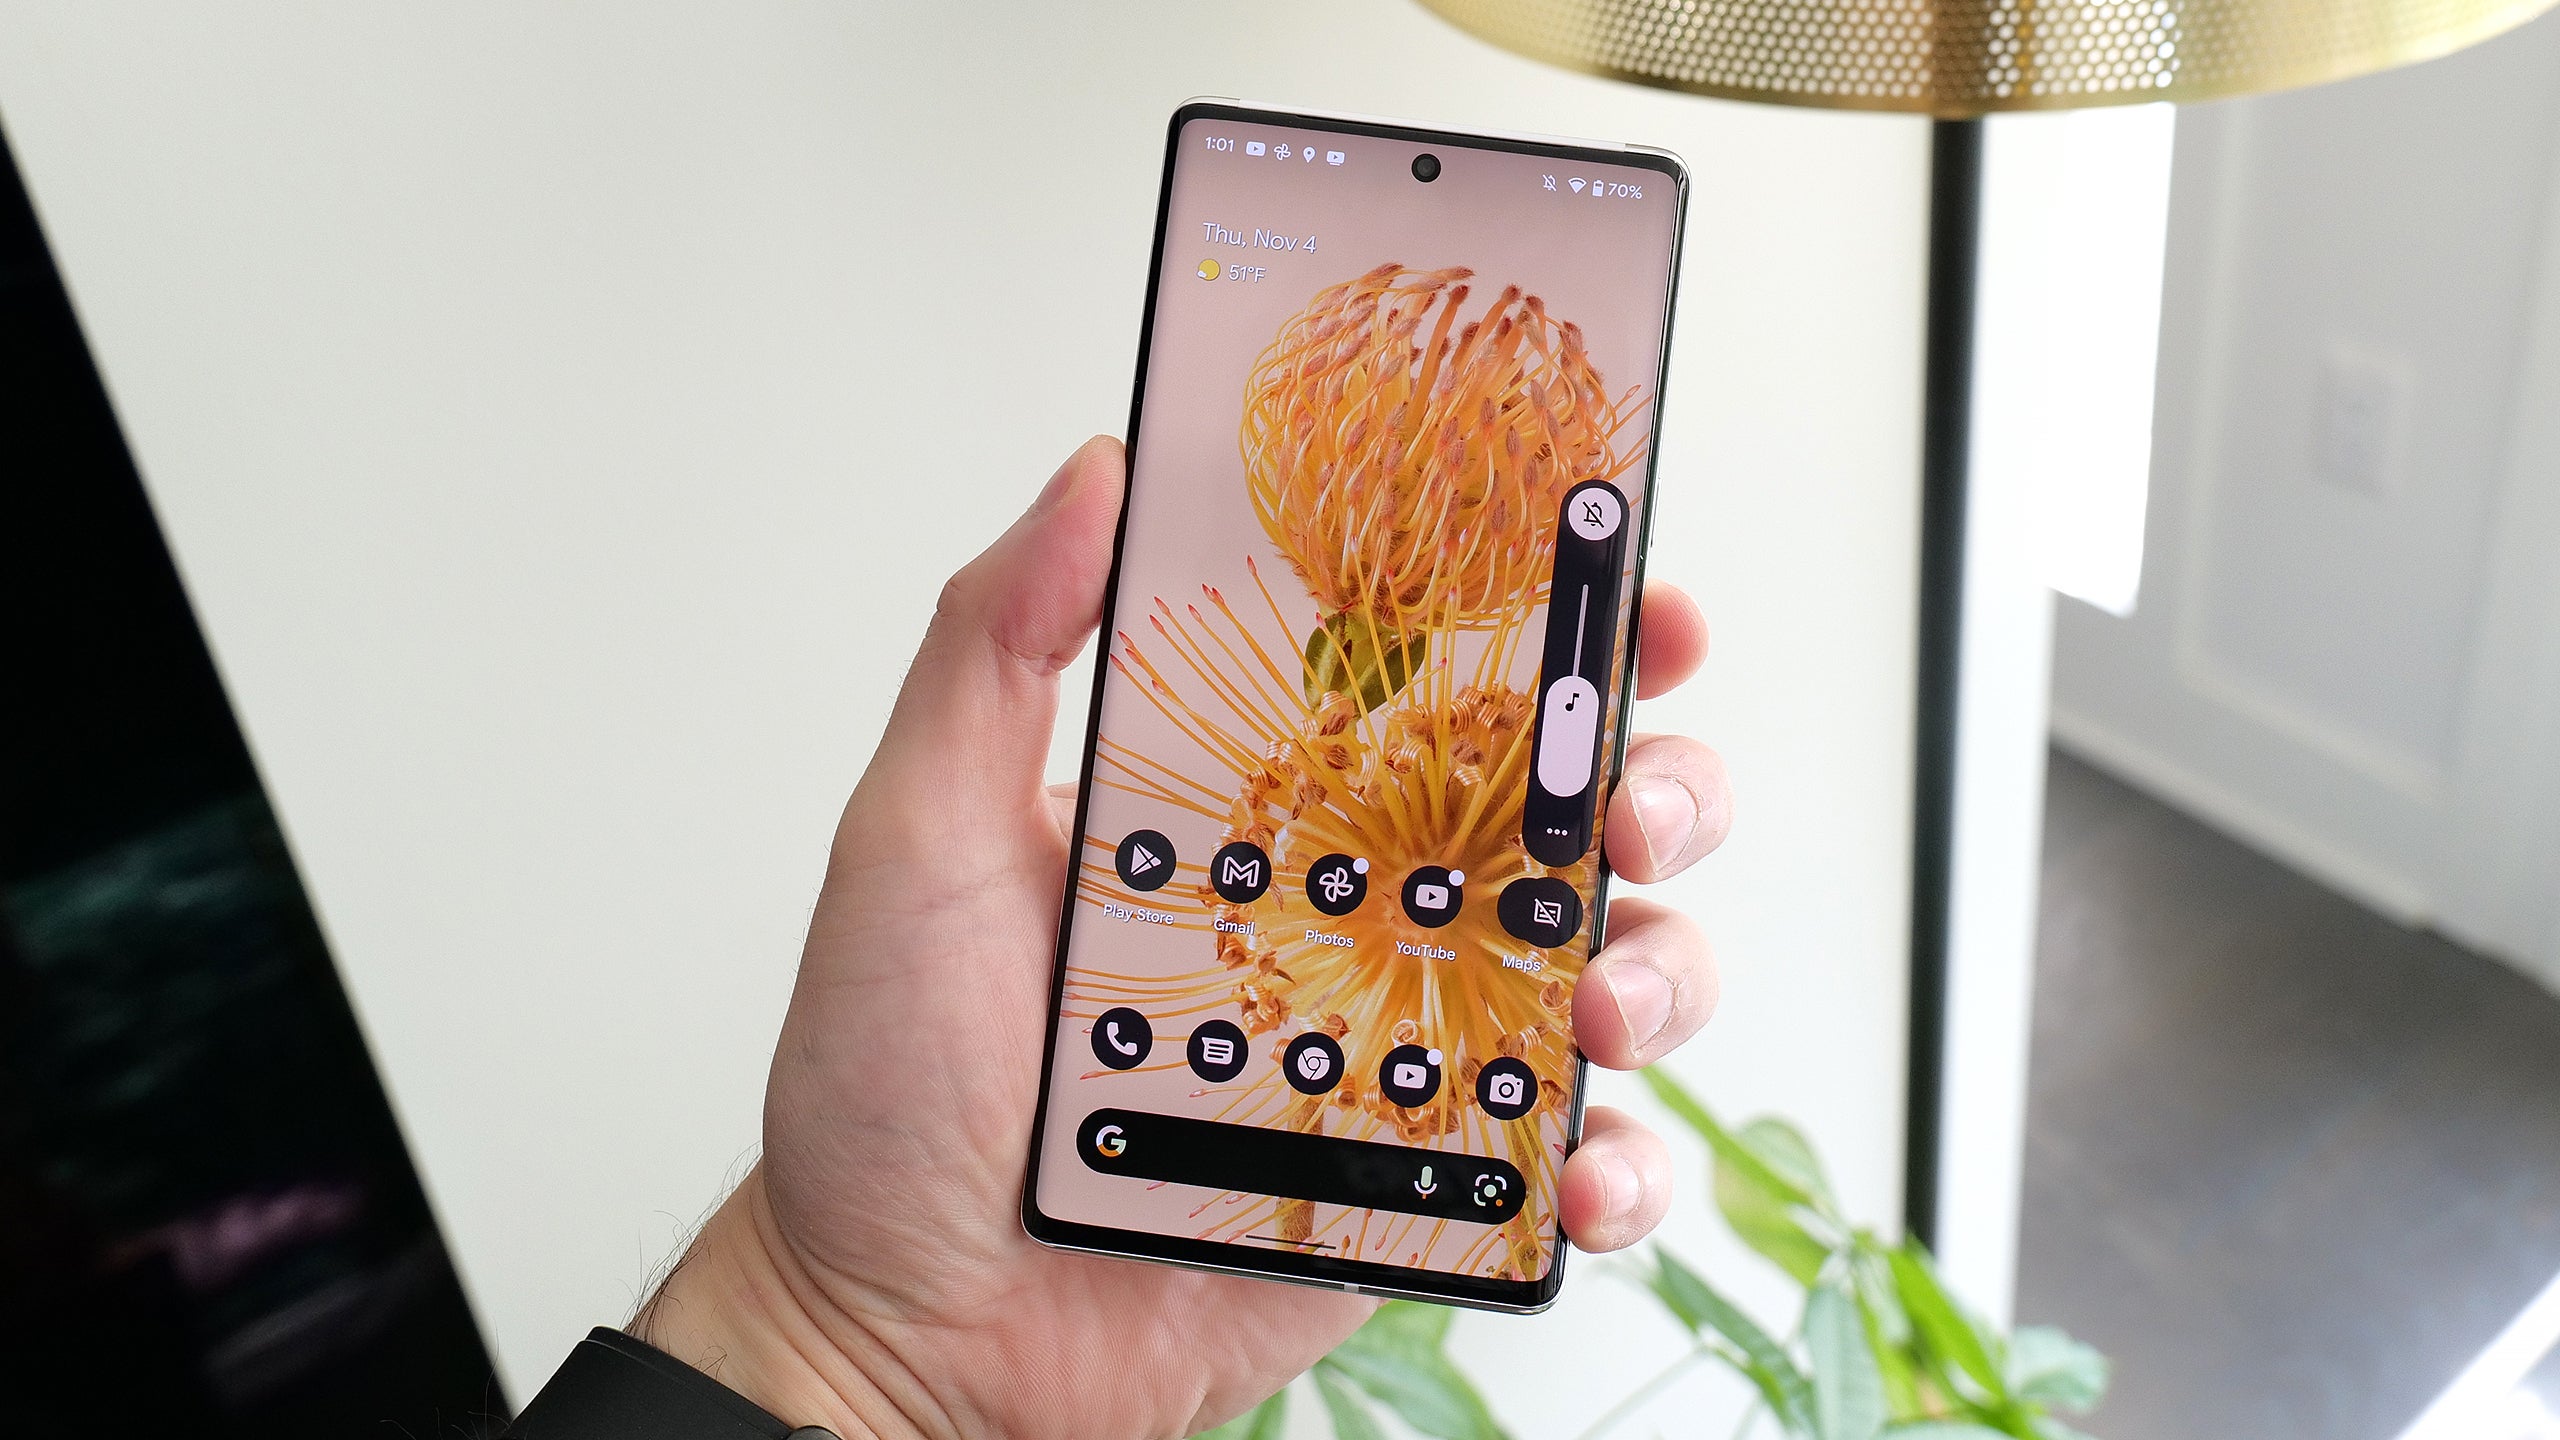 Android 12's visual overhaul makes it easier to use features like the volume slider. (Photo: Sam Rutherford/Gizmodo)